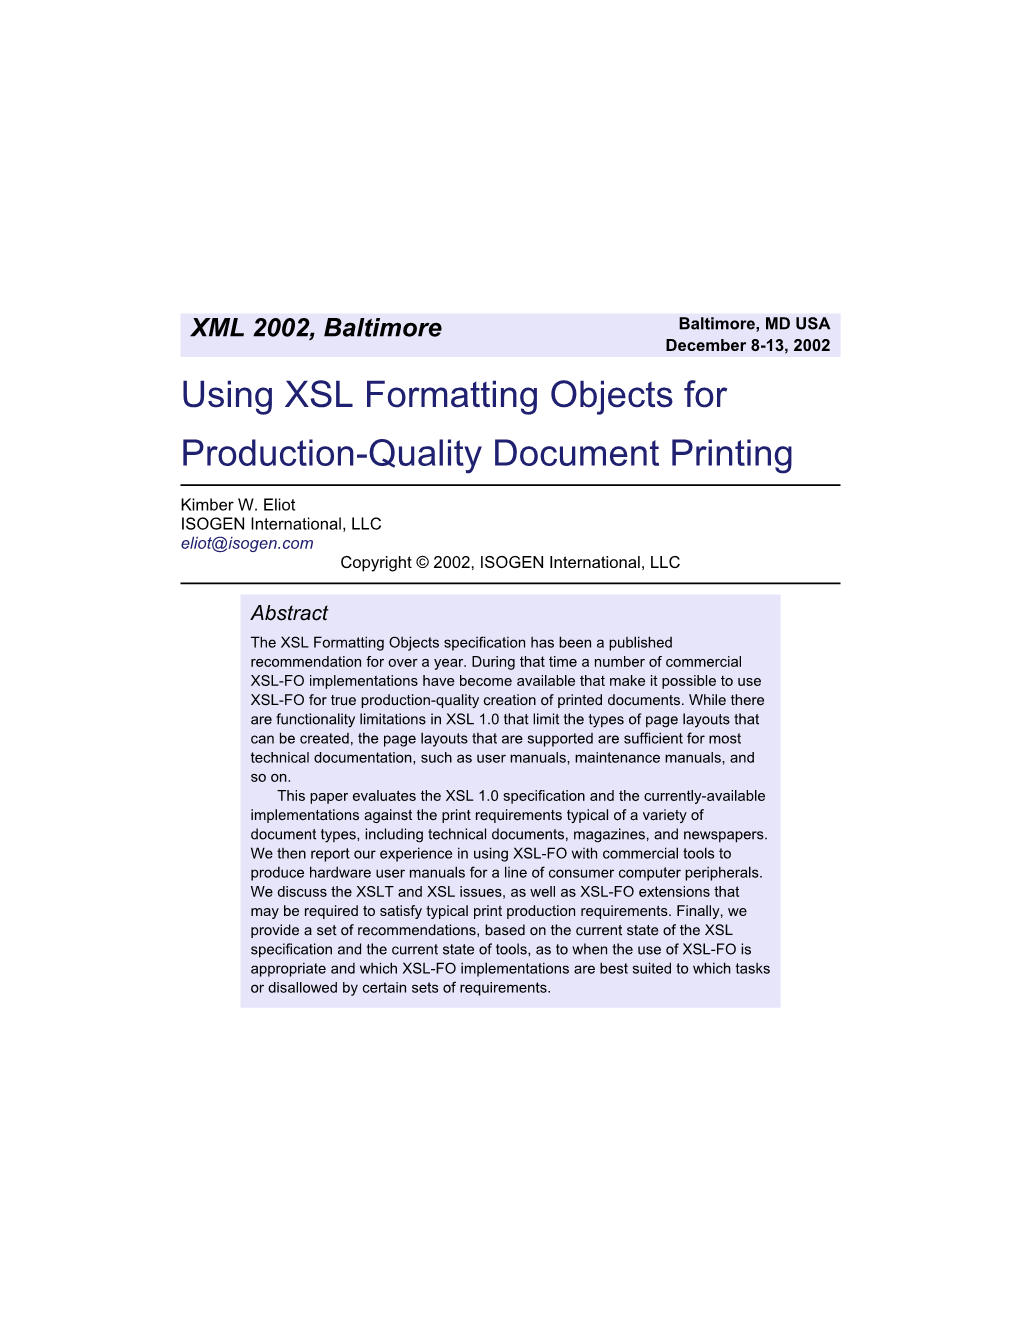 Using XSL Formatting Objects for Production-Quality Document Printing